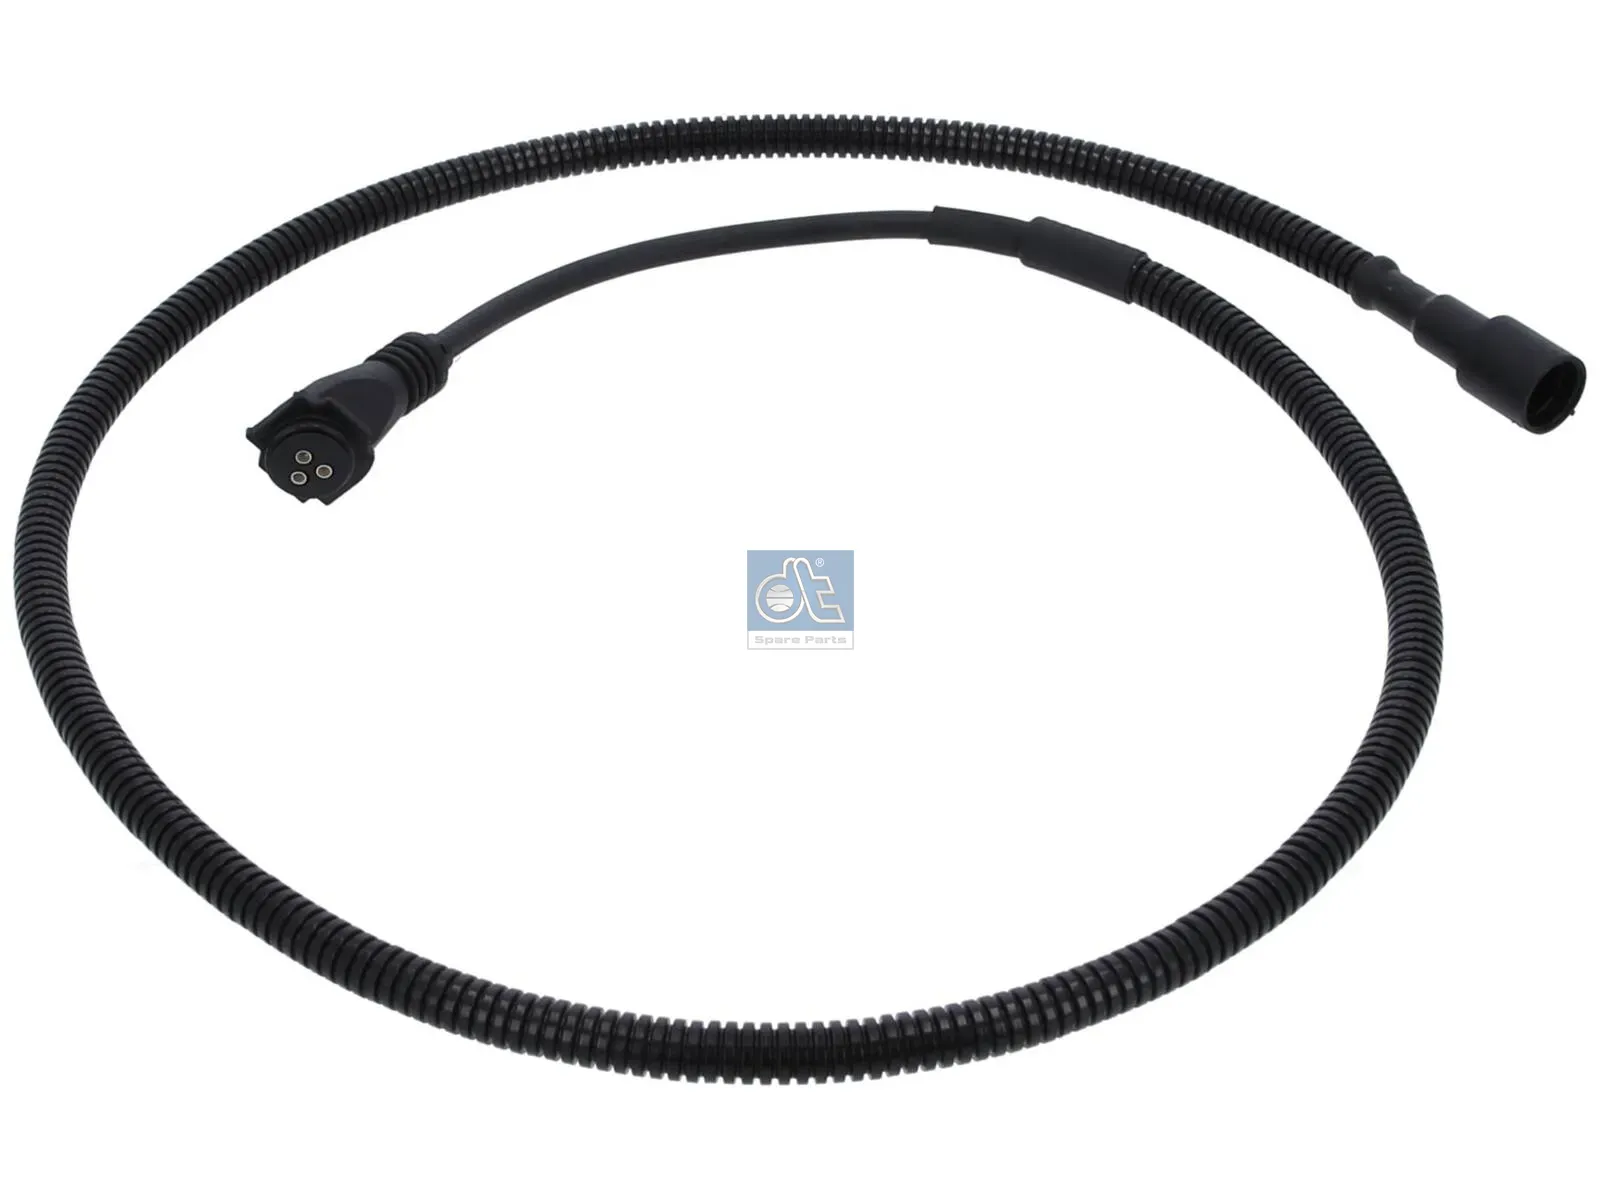 EBS cable